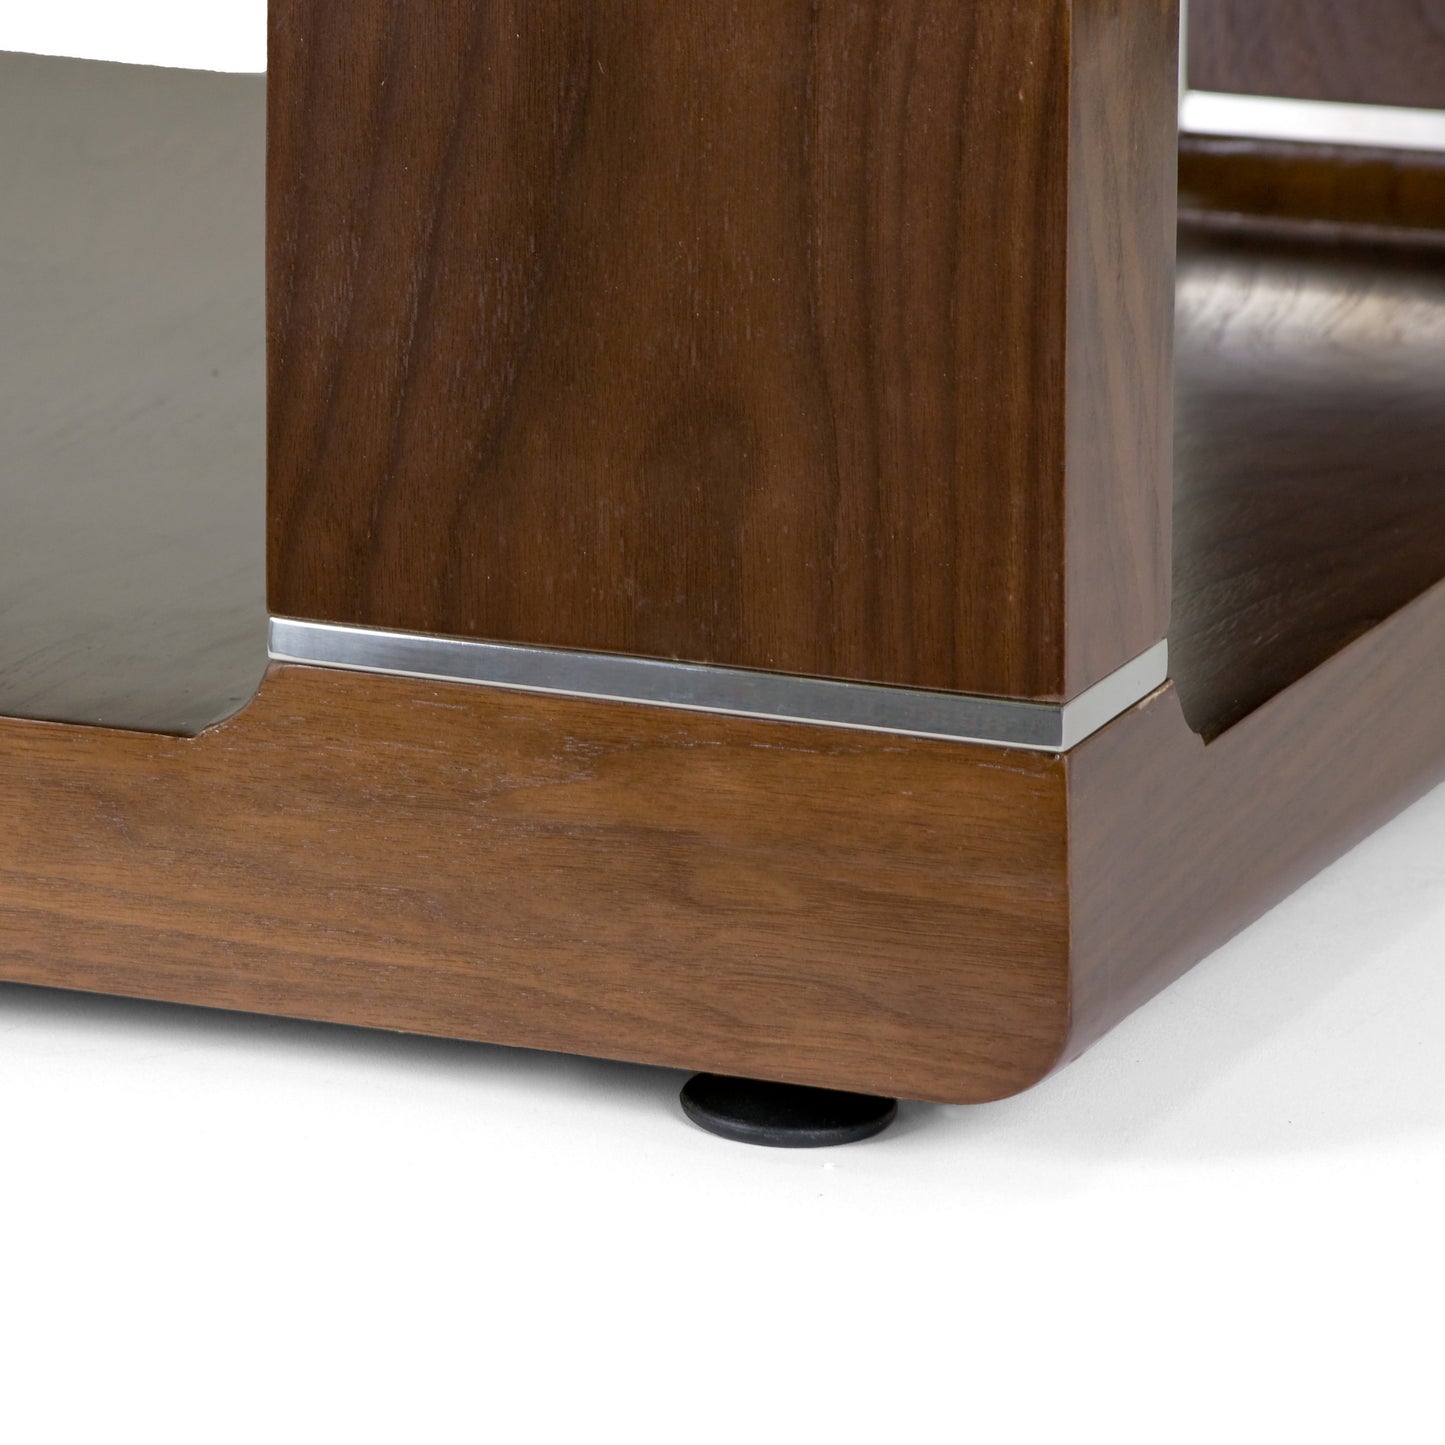 Airlie Walnut Color Modern Coffee Table with Silver Metal Accent